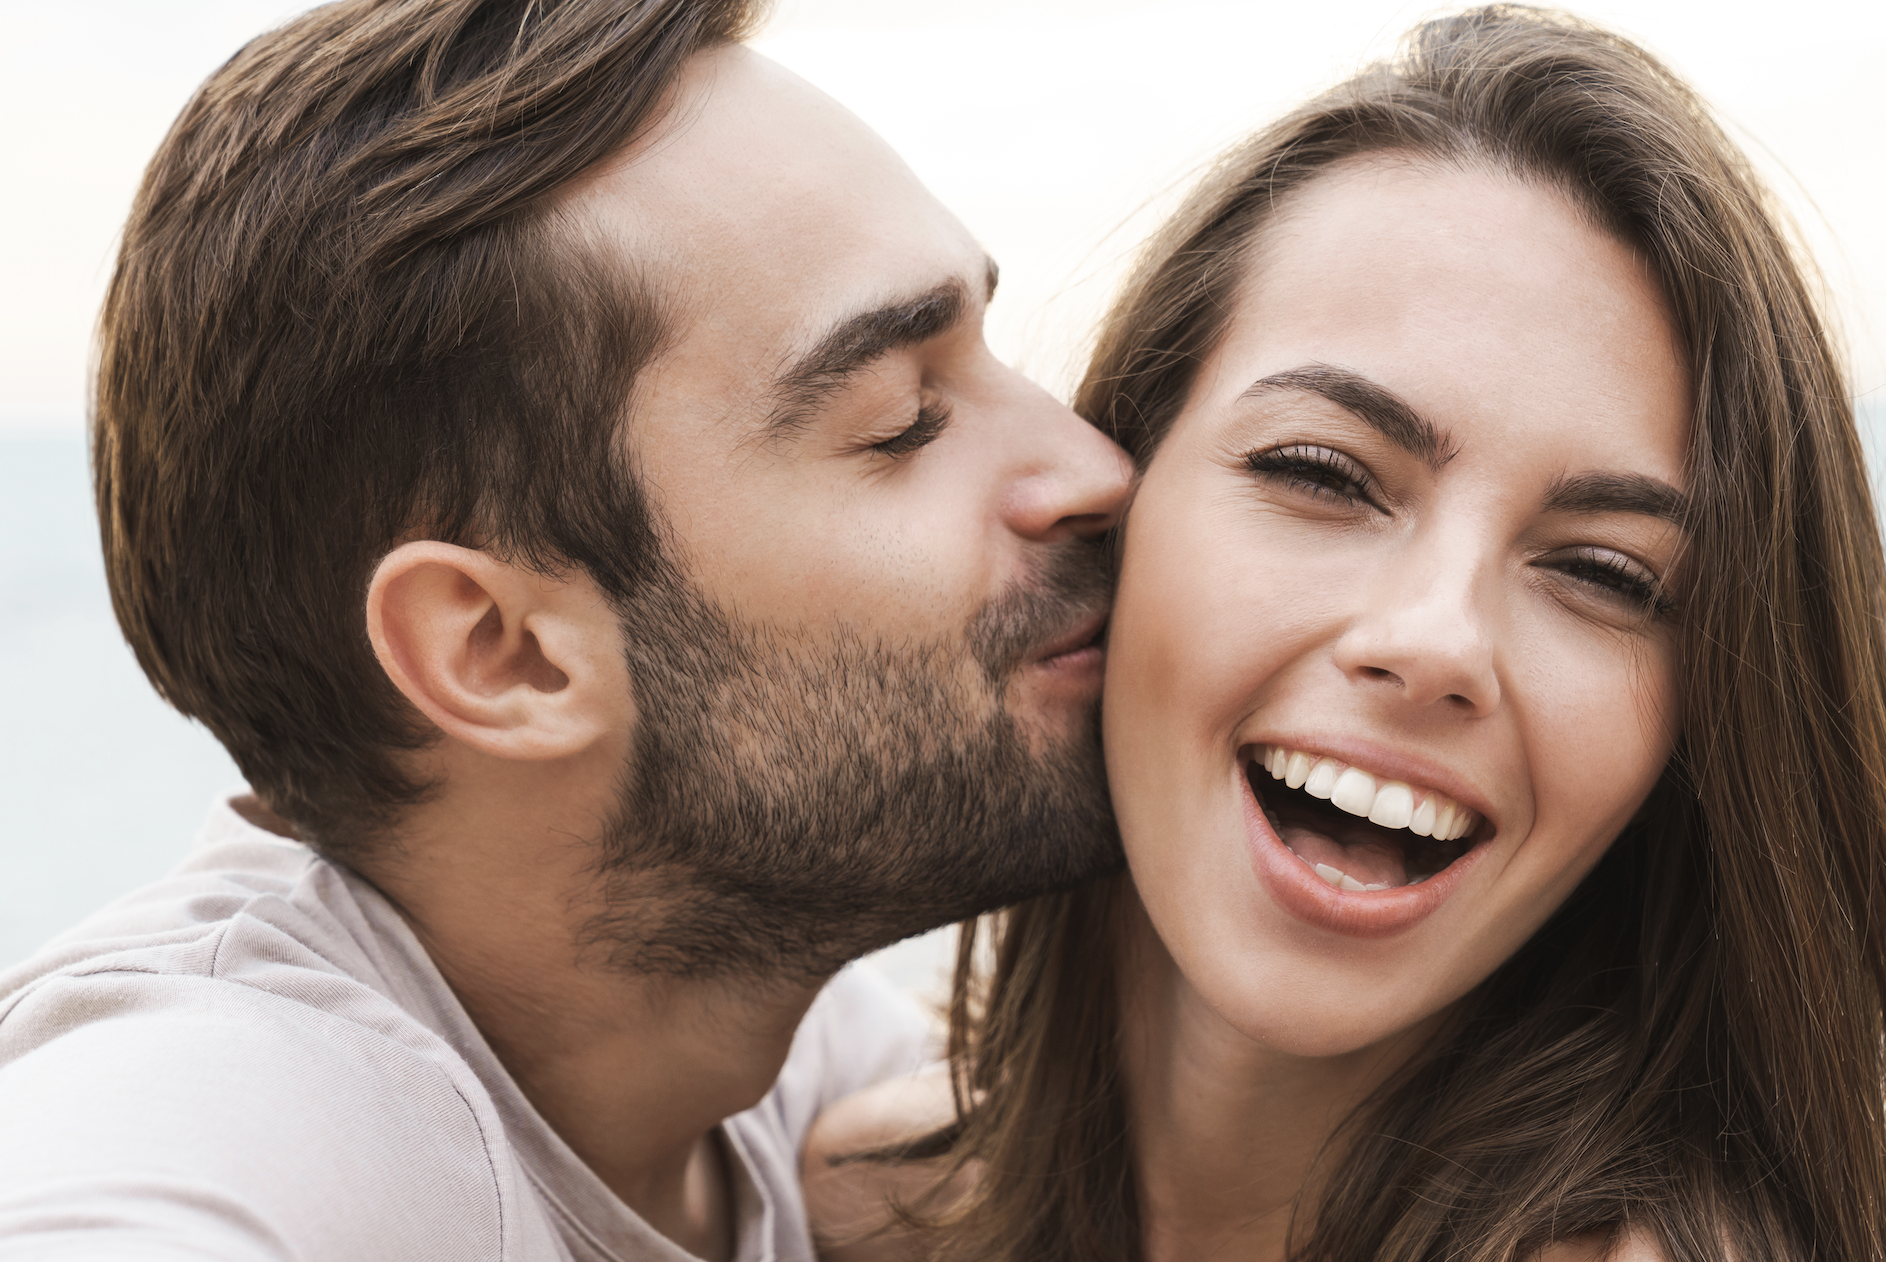 Is an Open Relationship Right for You? Signs to Consider